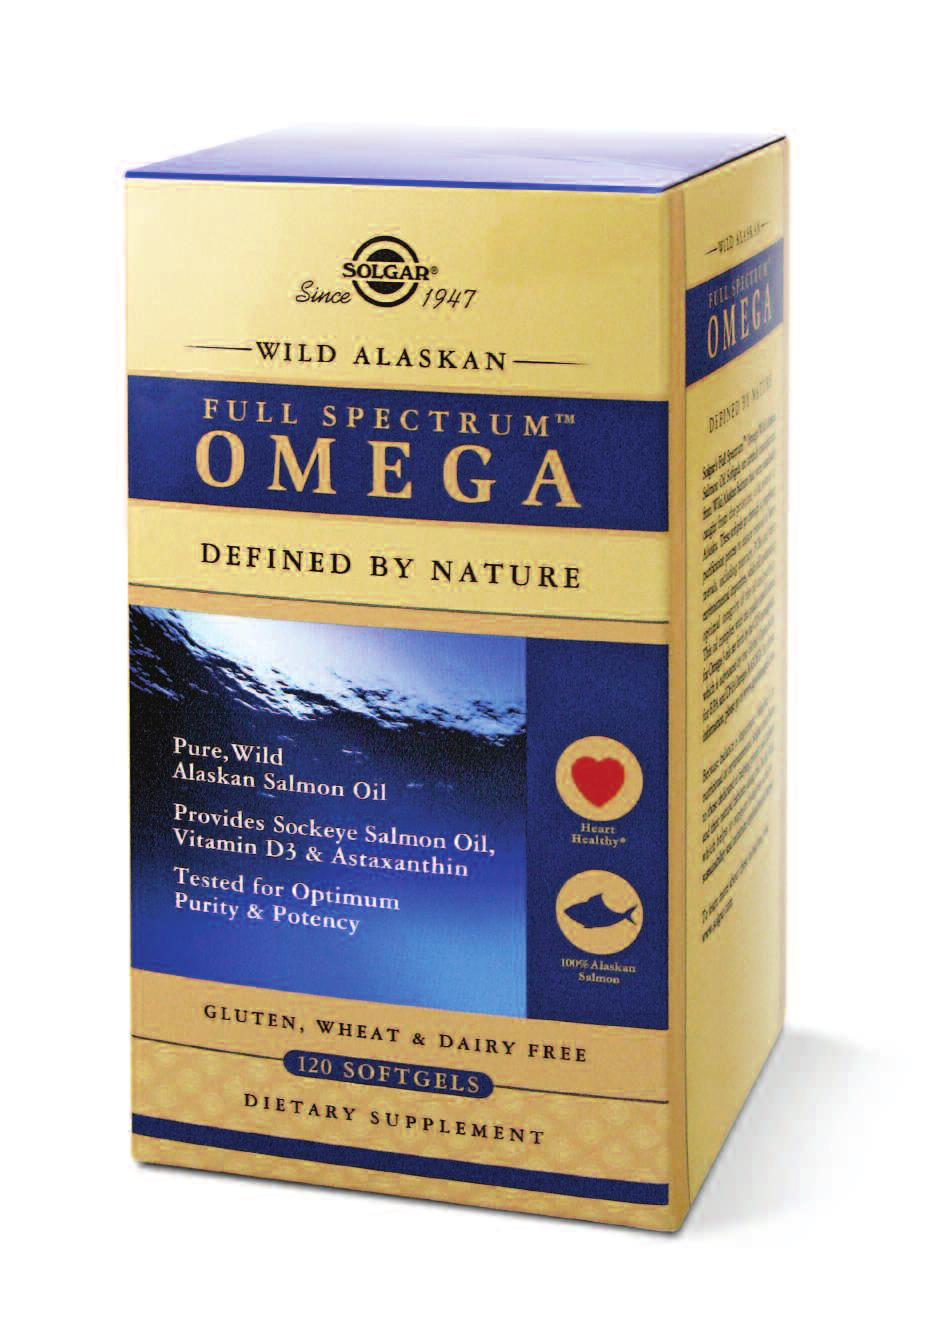 * You can think of the omega-3 family as a series of steppingstones, with one compound serving as the precursor for the next.